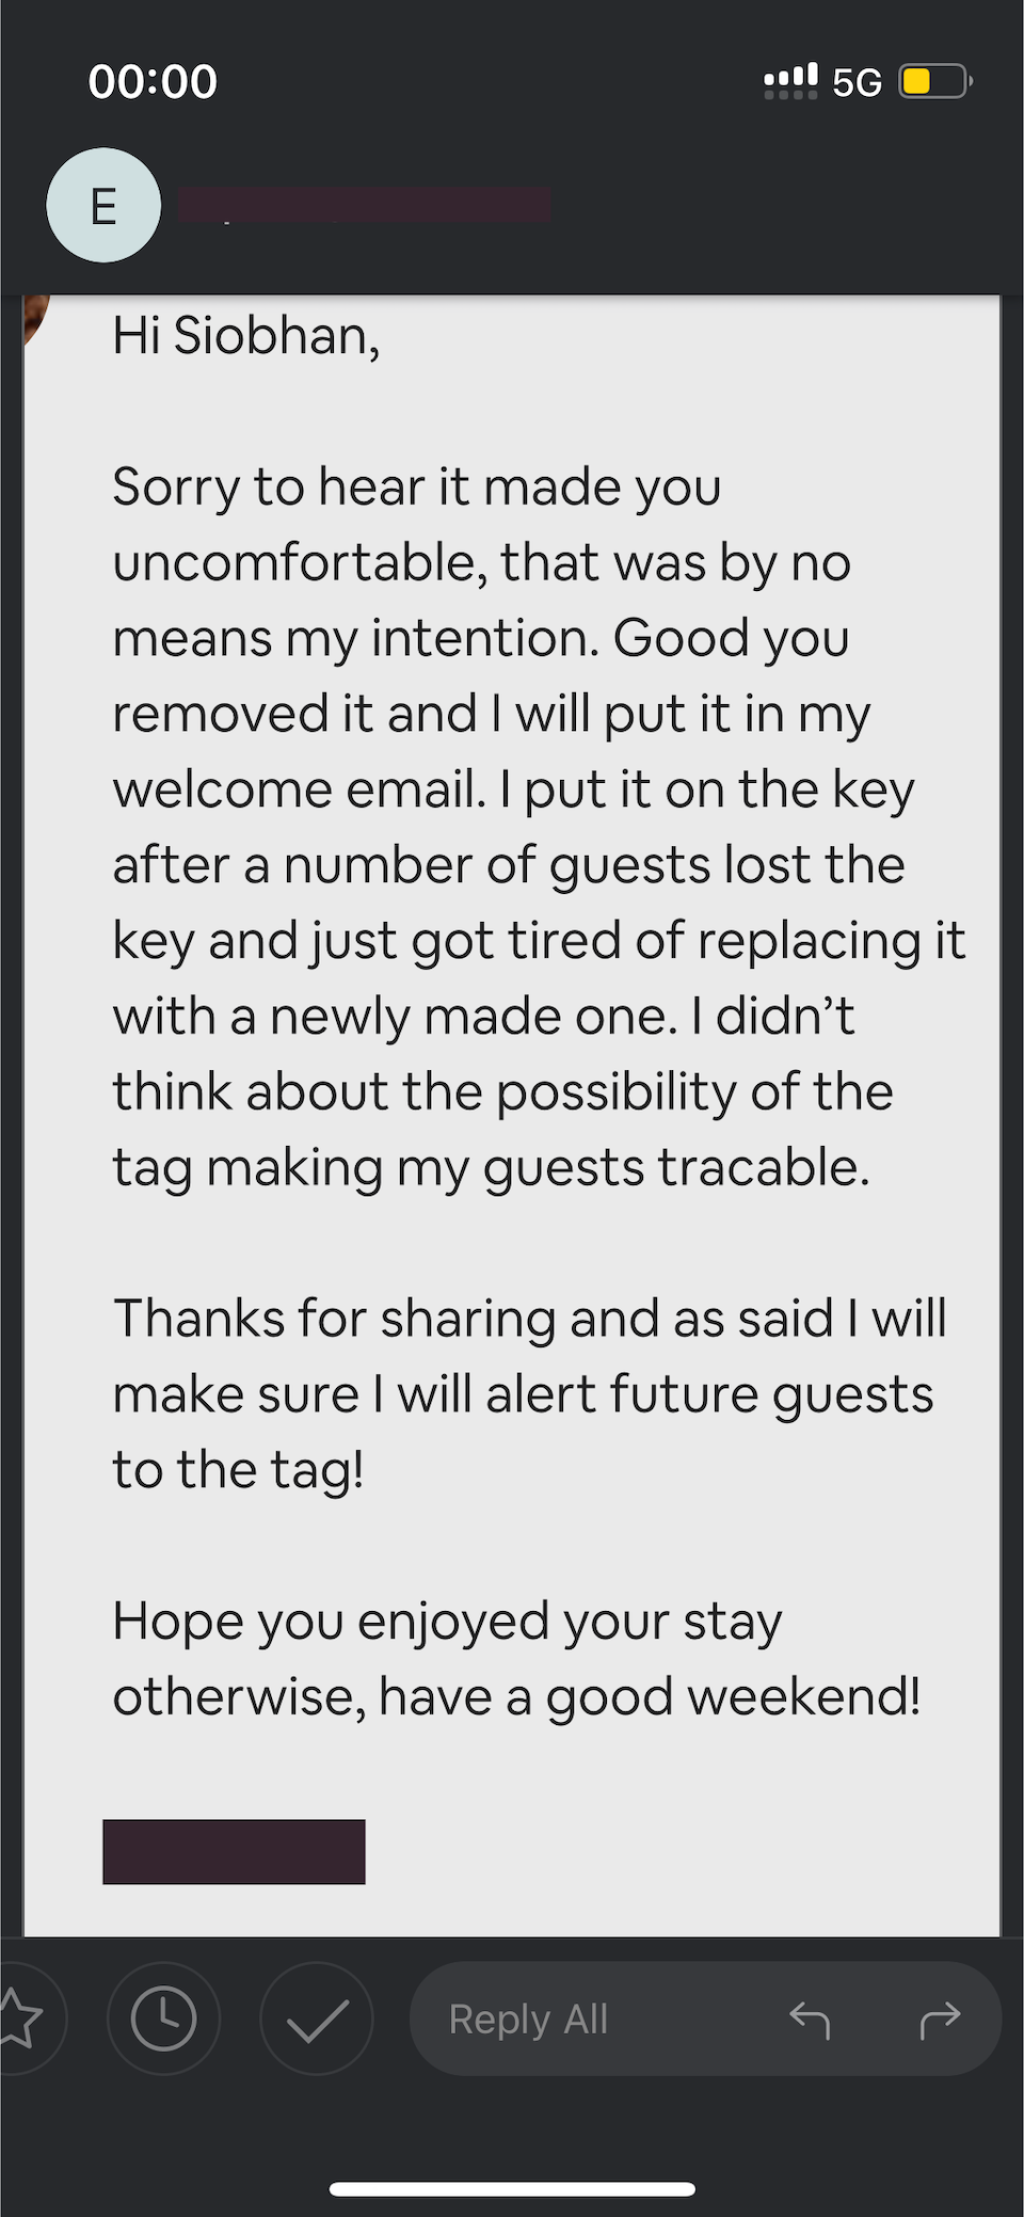 Screenshot of the response I got from the AirBnB host stating that he had no intention of making me uncomfortable and that he will make sure it is clearer in the future.